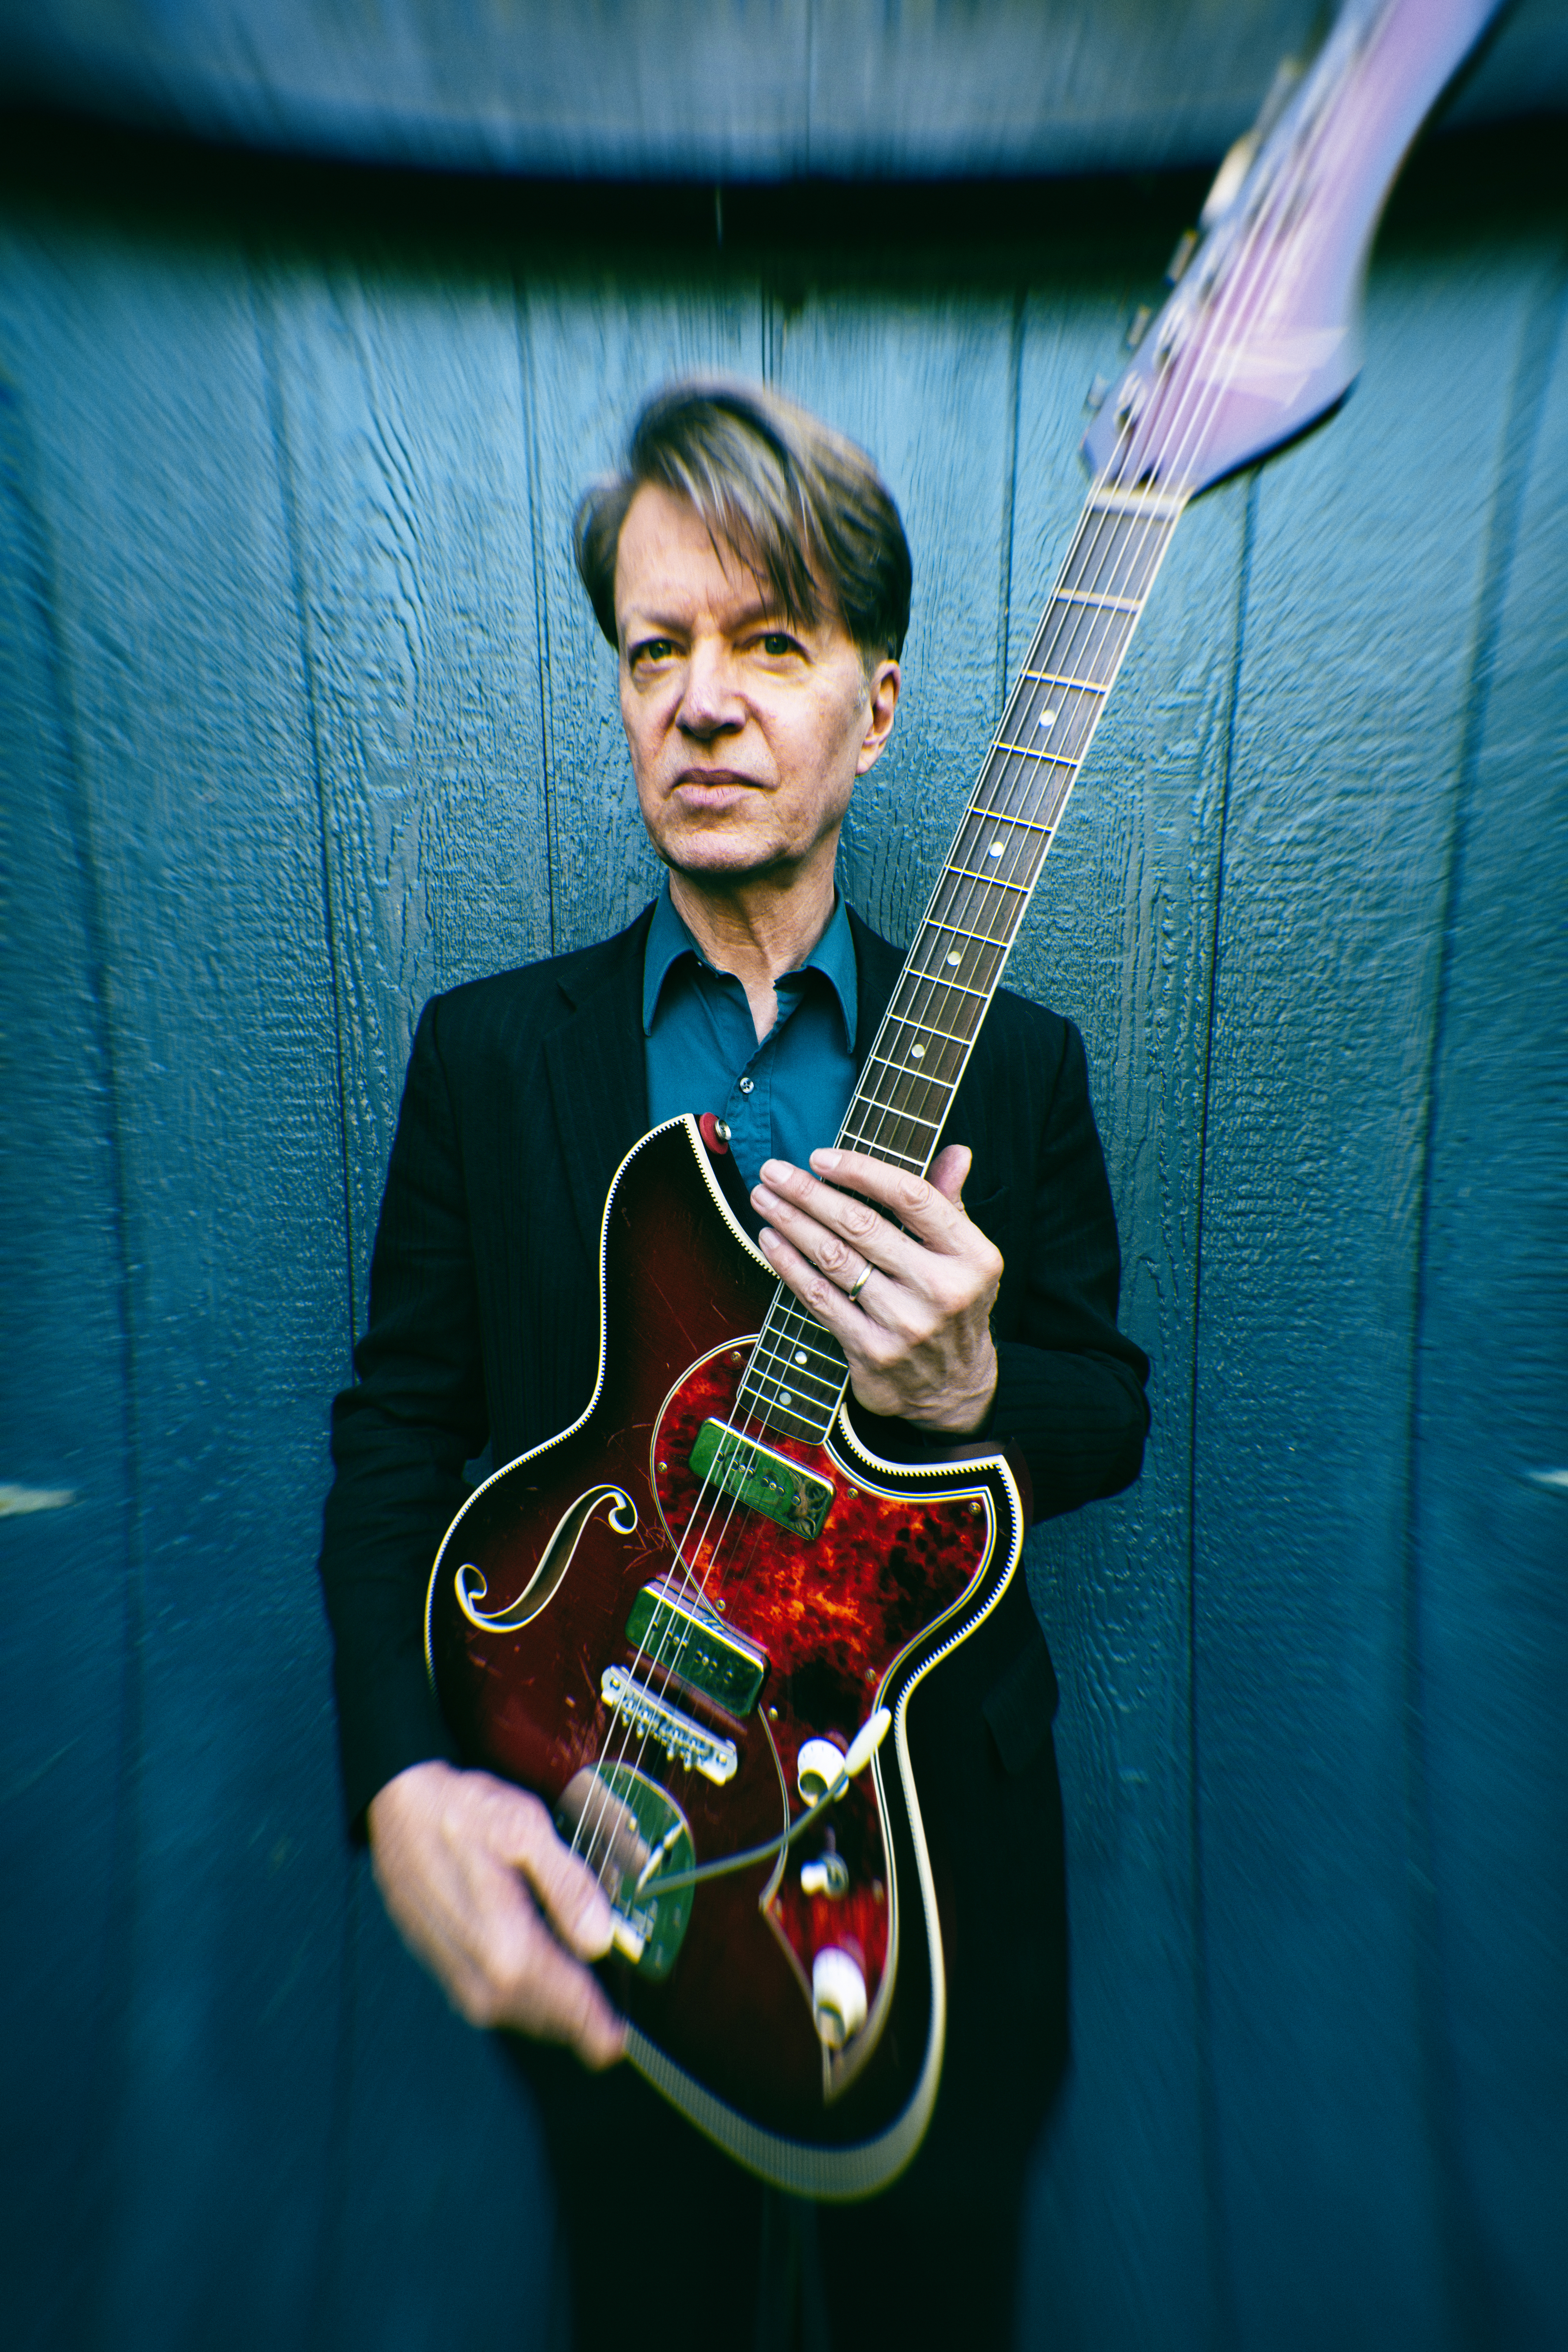 Nels Cline, holding an electric guitar upright, faces the camera, wearing a suit